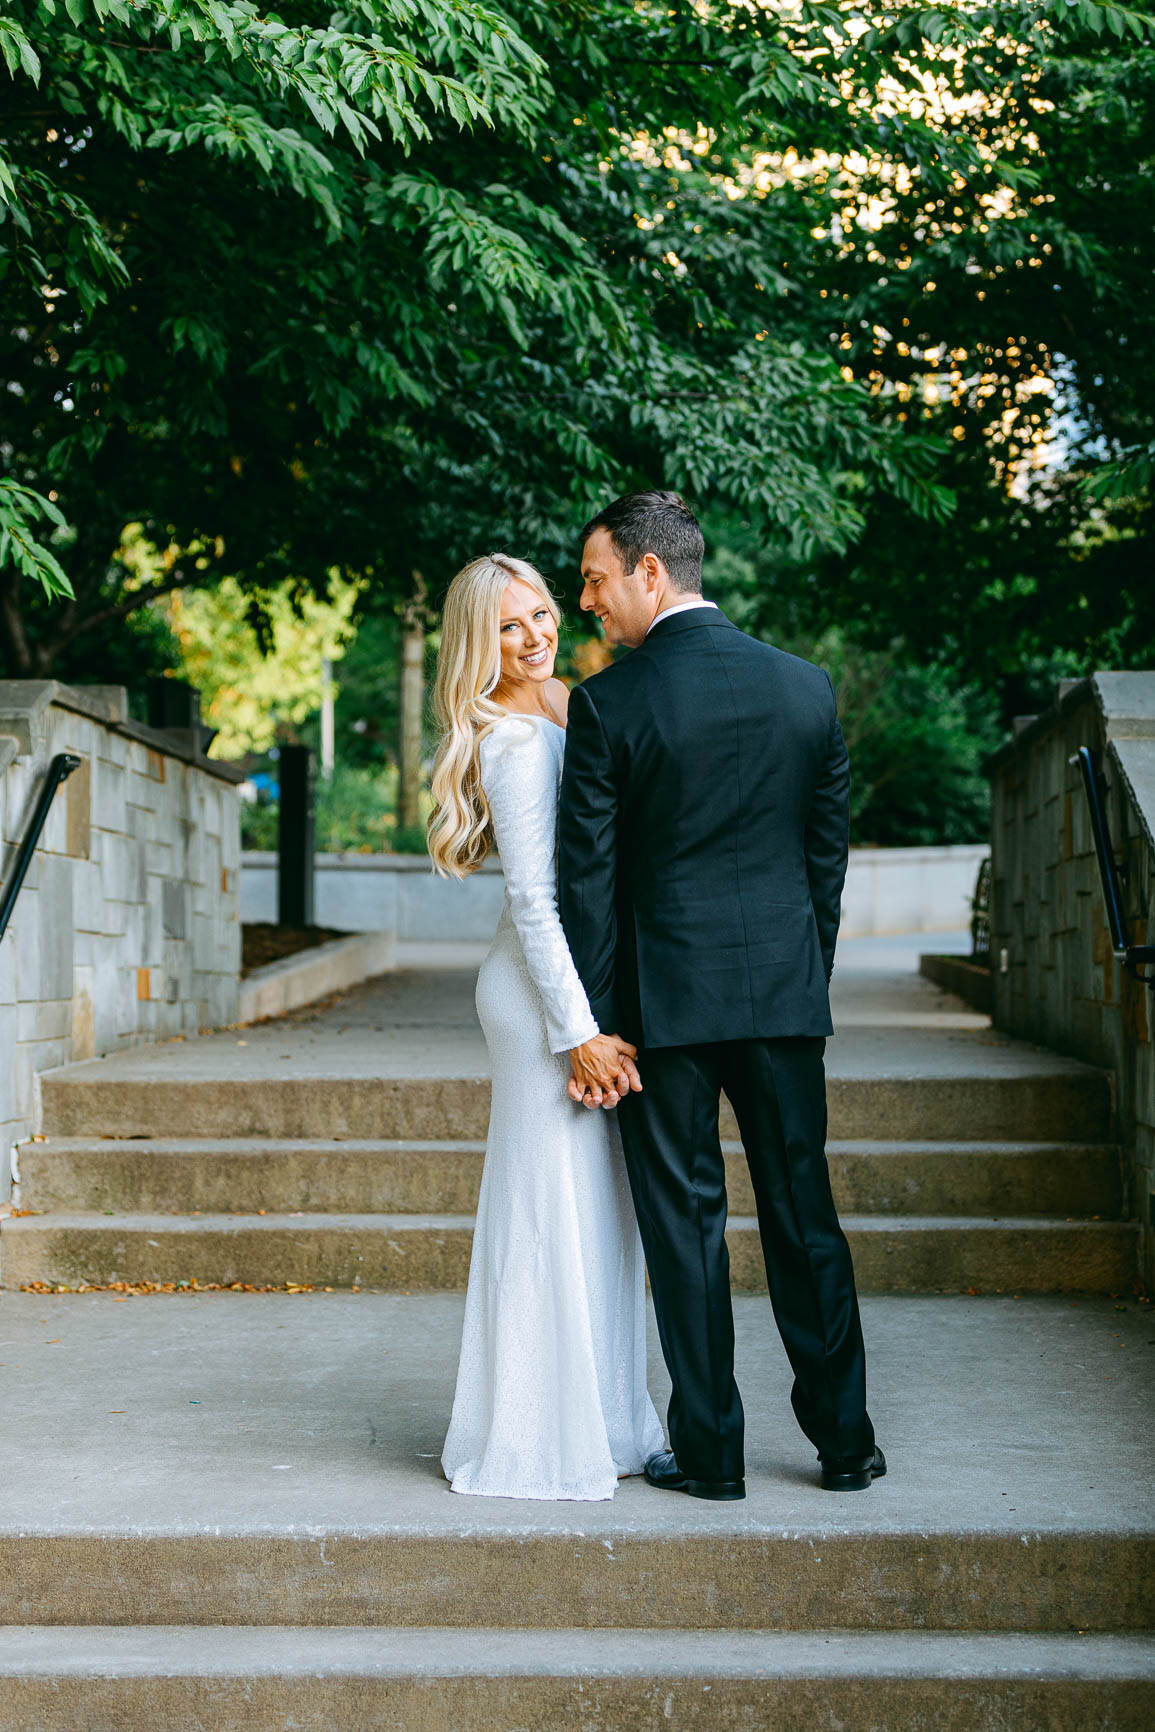 uptown Charlotte wedding shot by by Nhieu Tang Photography | nhieutang.com